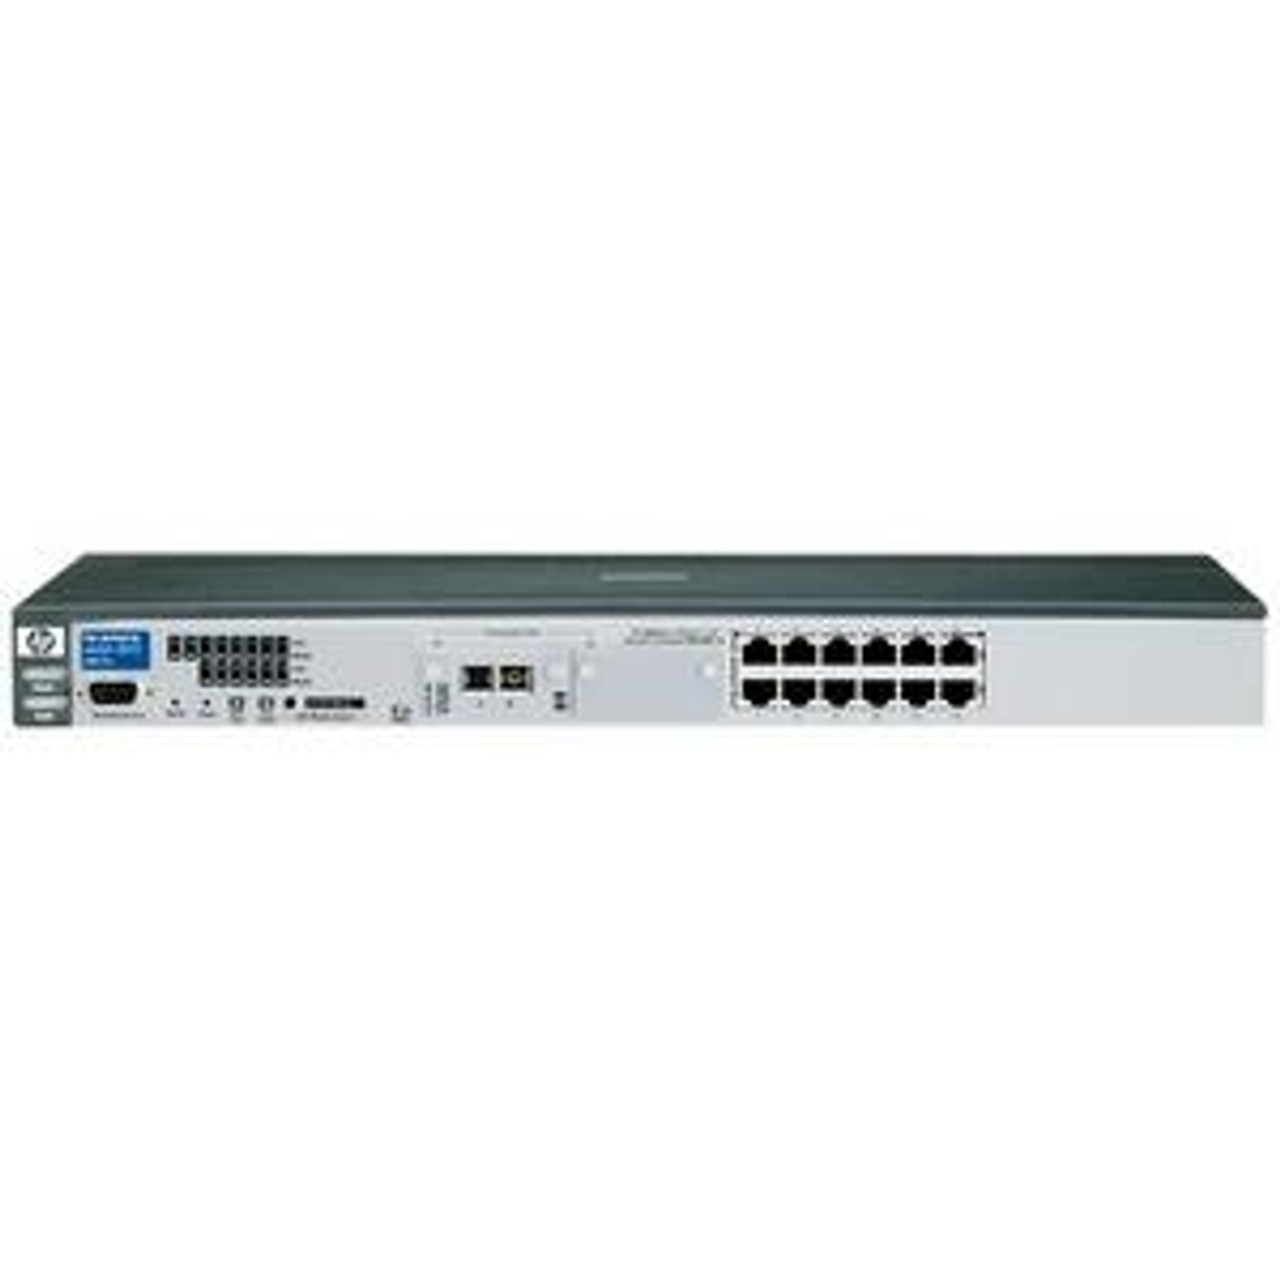 J4817A#ABA HP ProCurve Switch 2312 Unmanaged 12-Ports RJ-45 Fast Ethernet 10/100Base-Tx with 2GB Transceiver Slots (Refurbished)